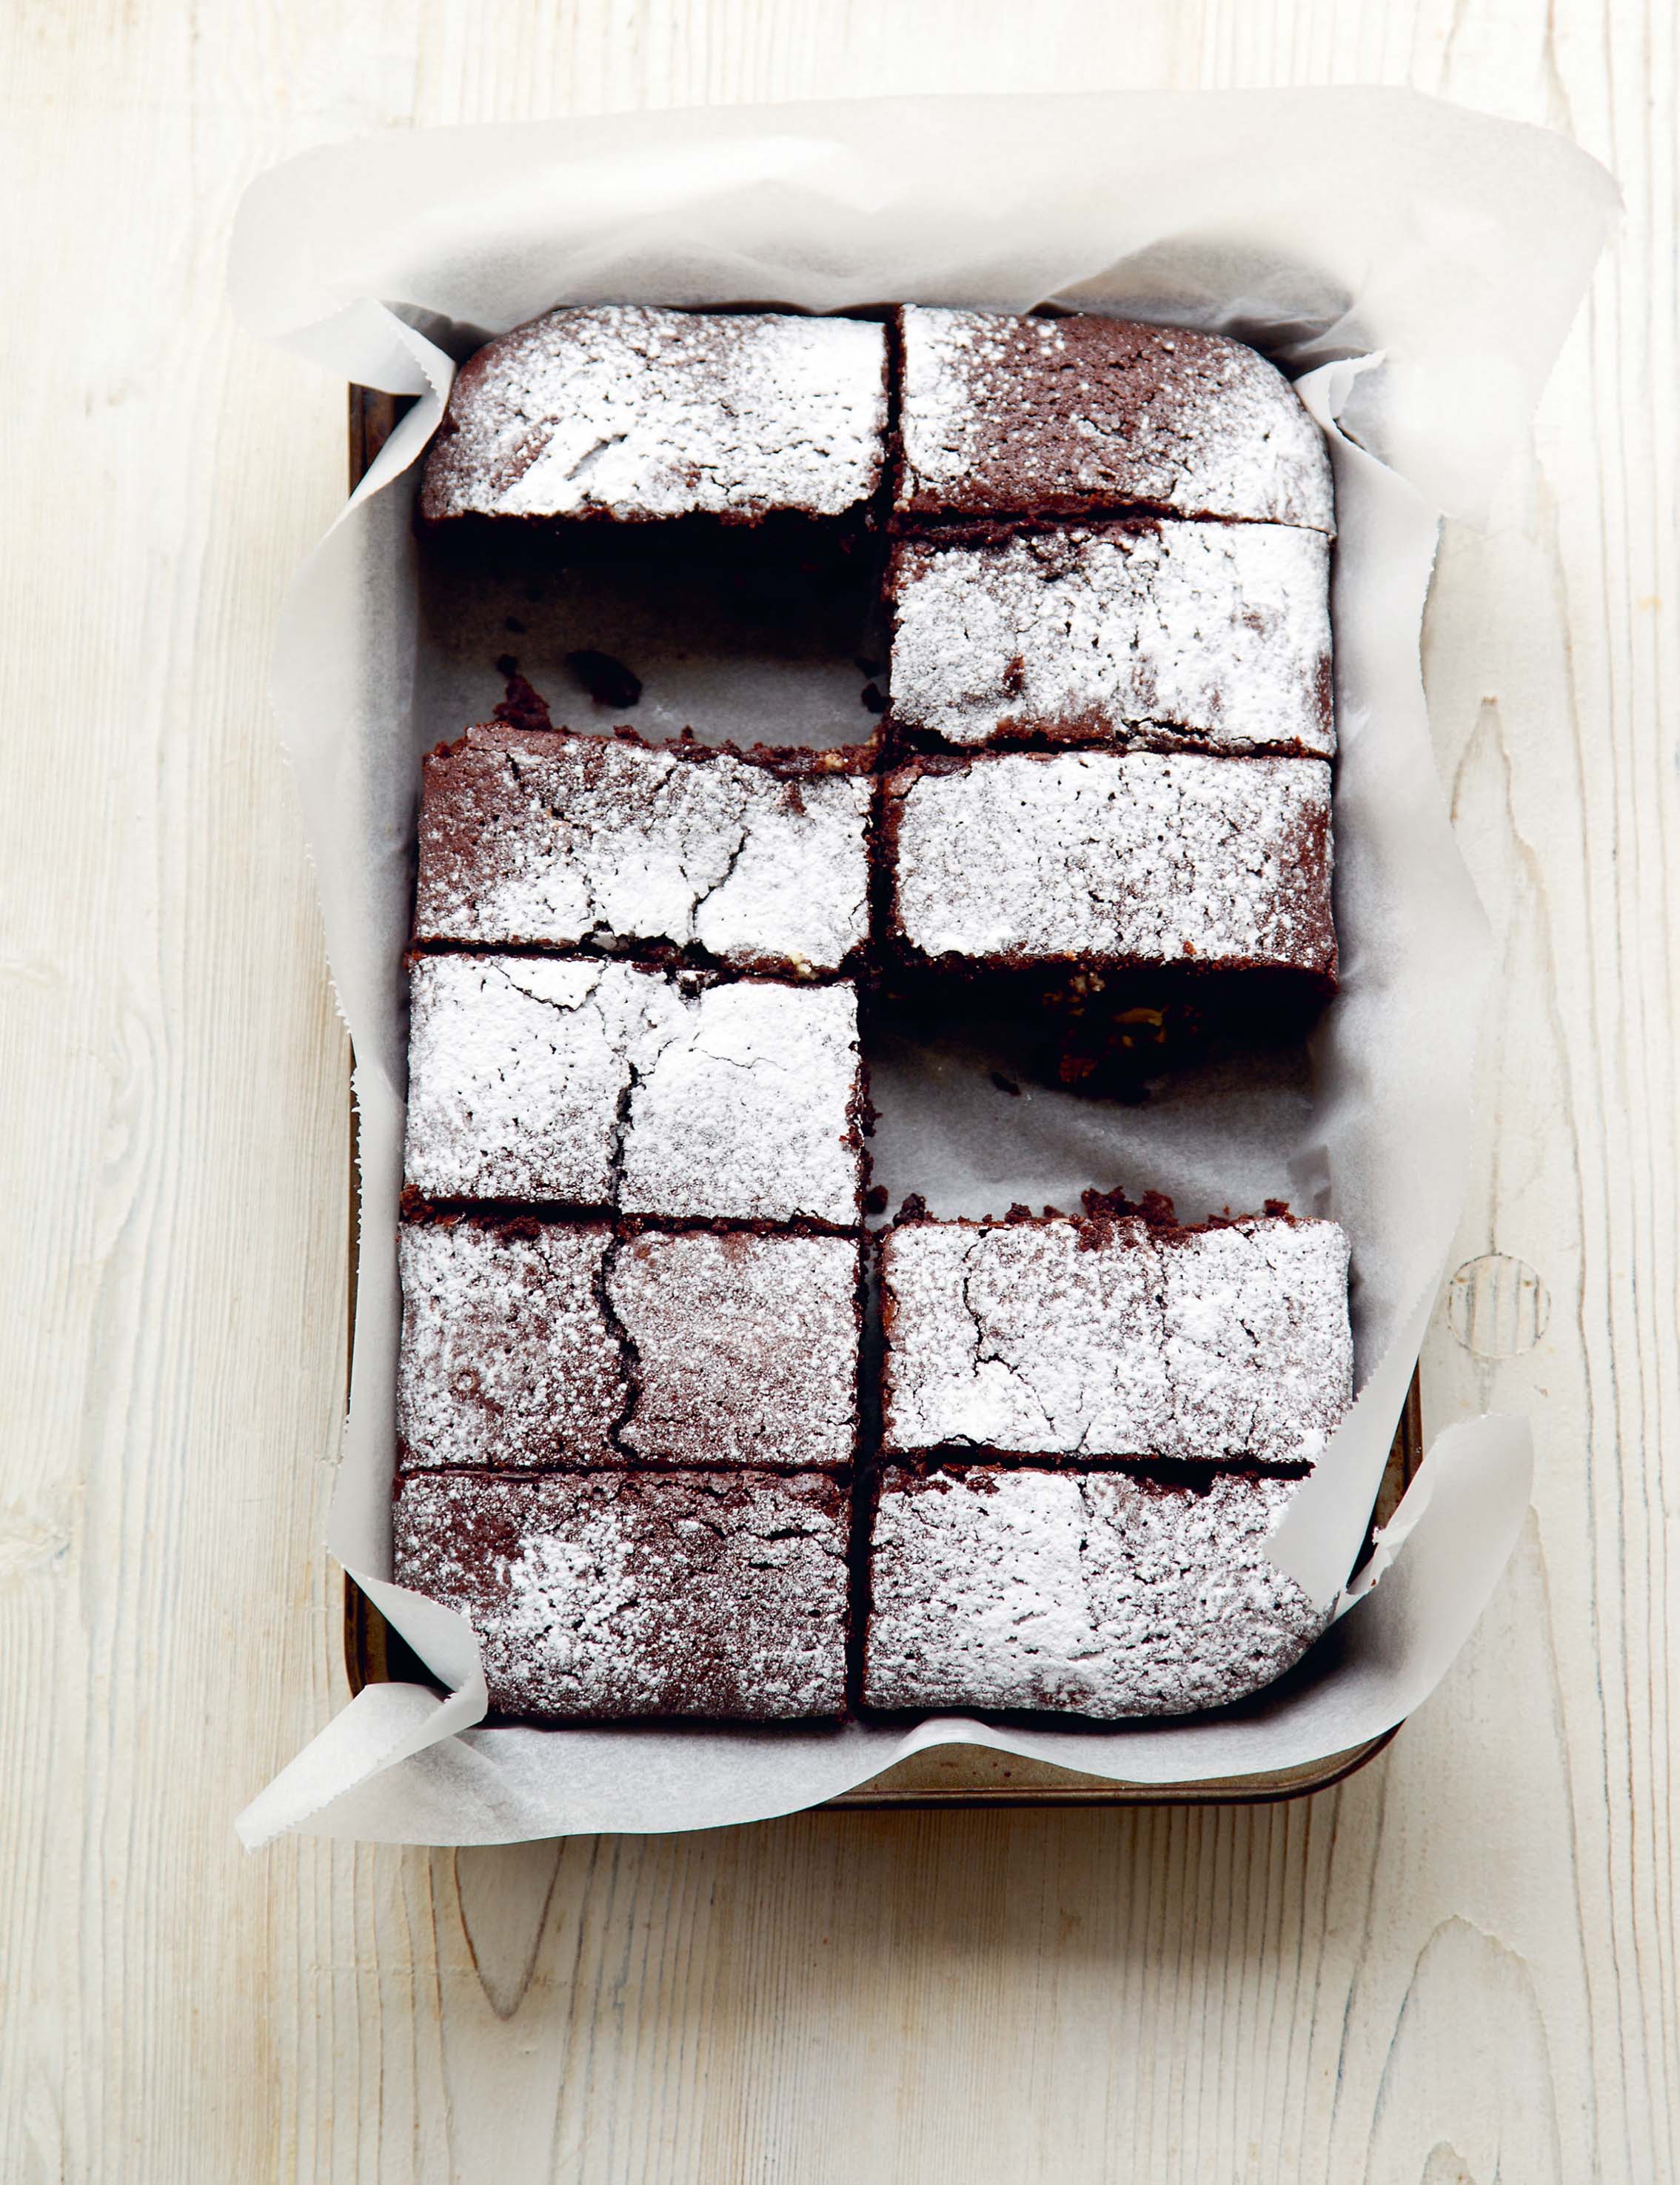 Lucy’s chewy chocolate brownies